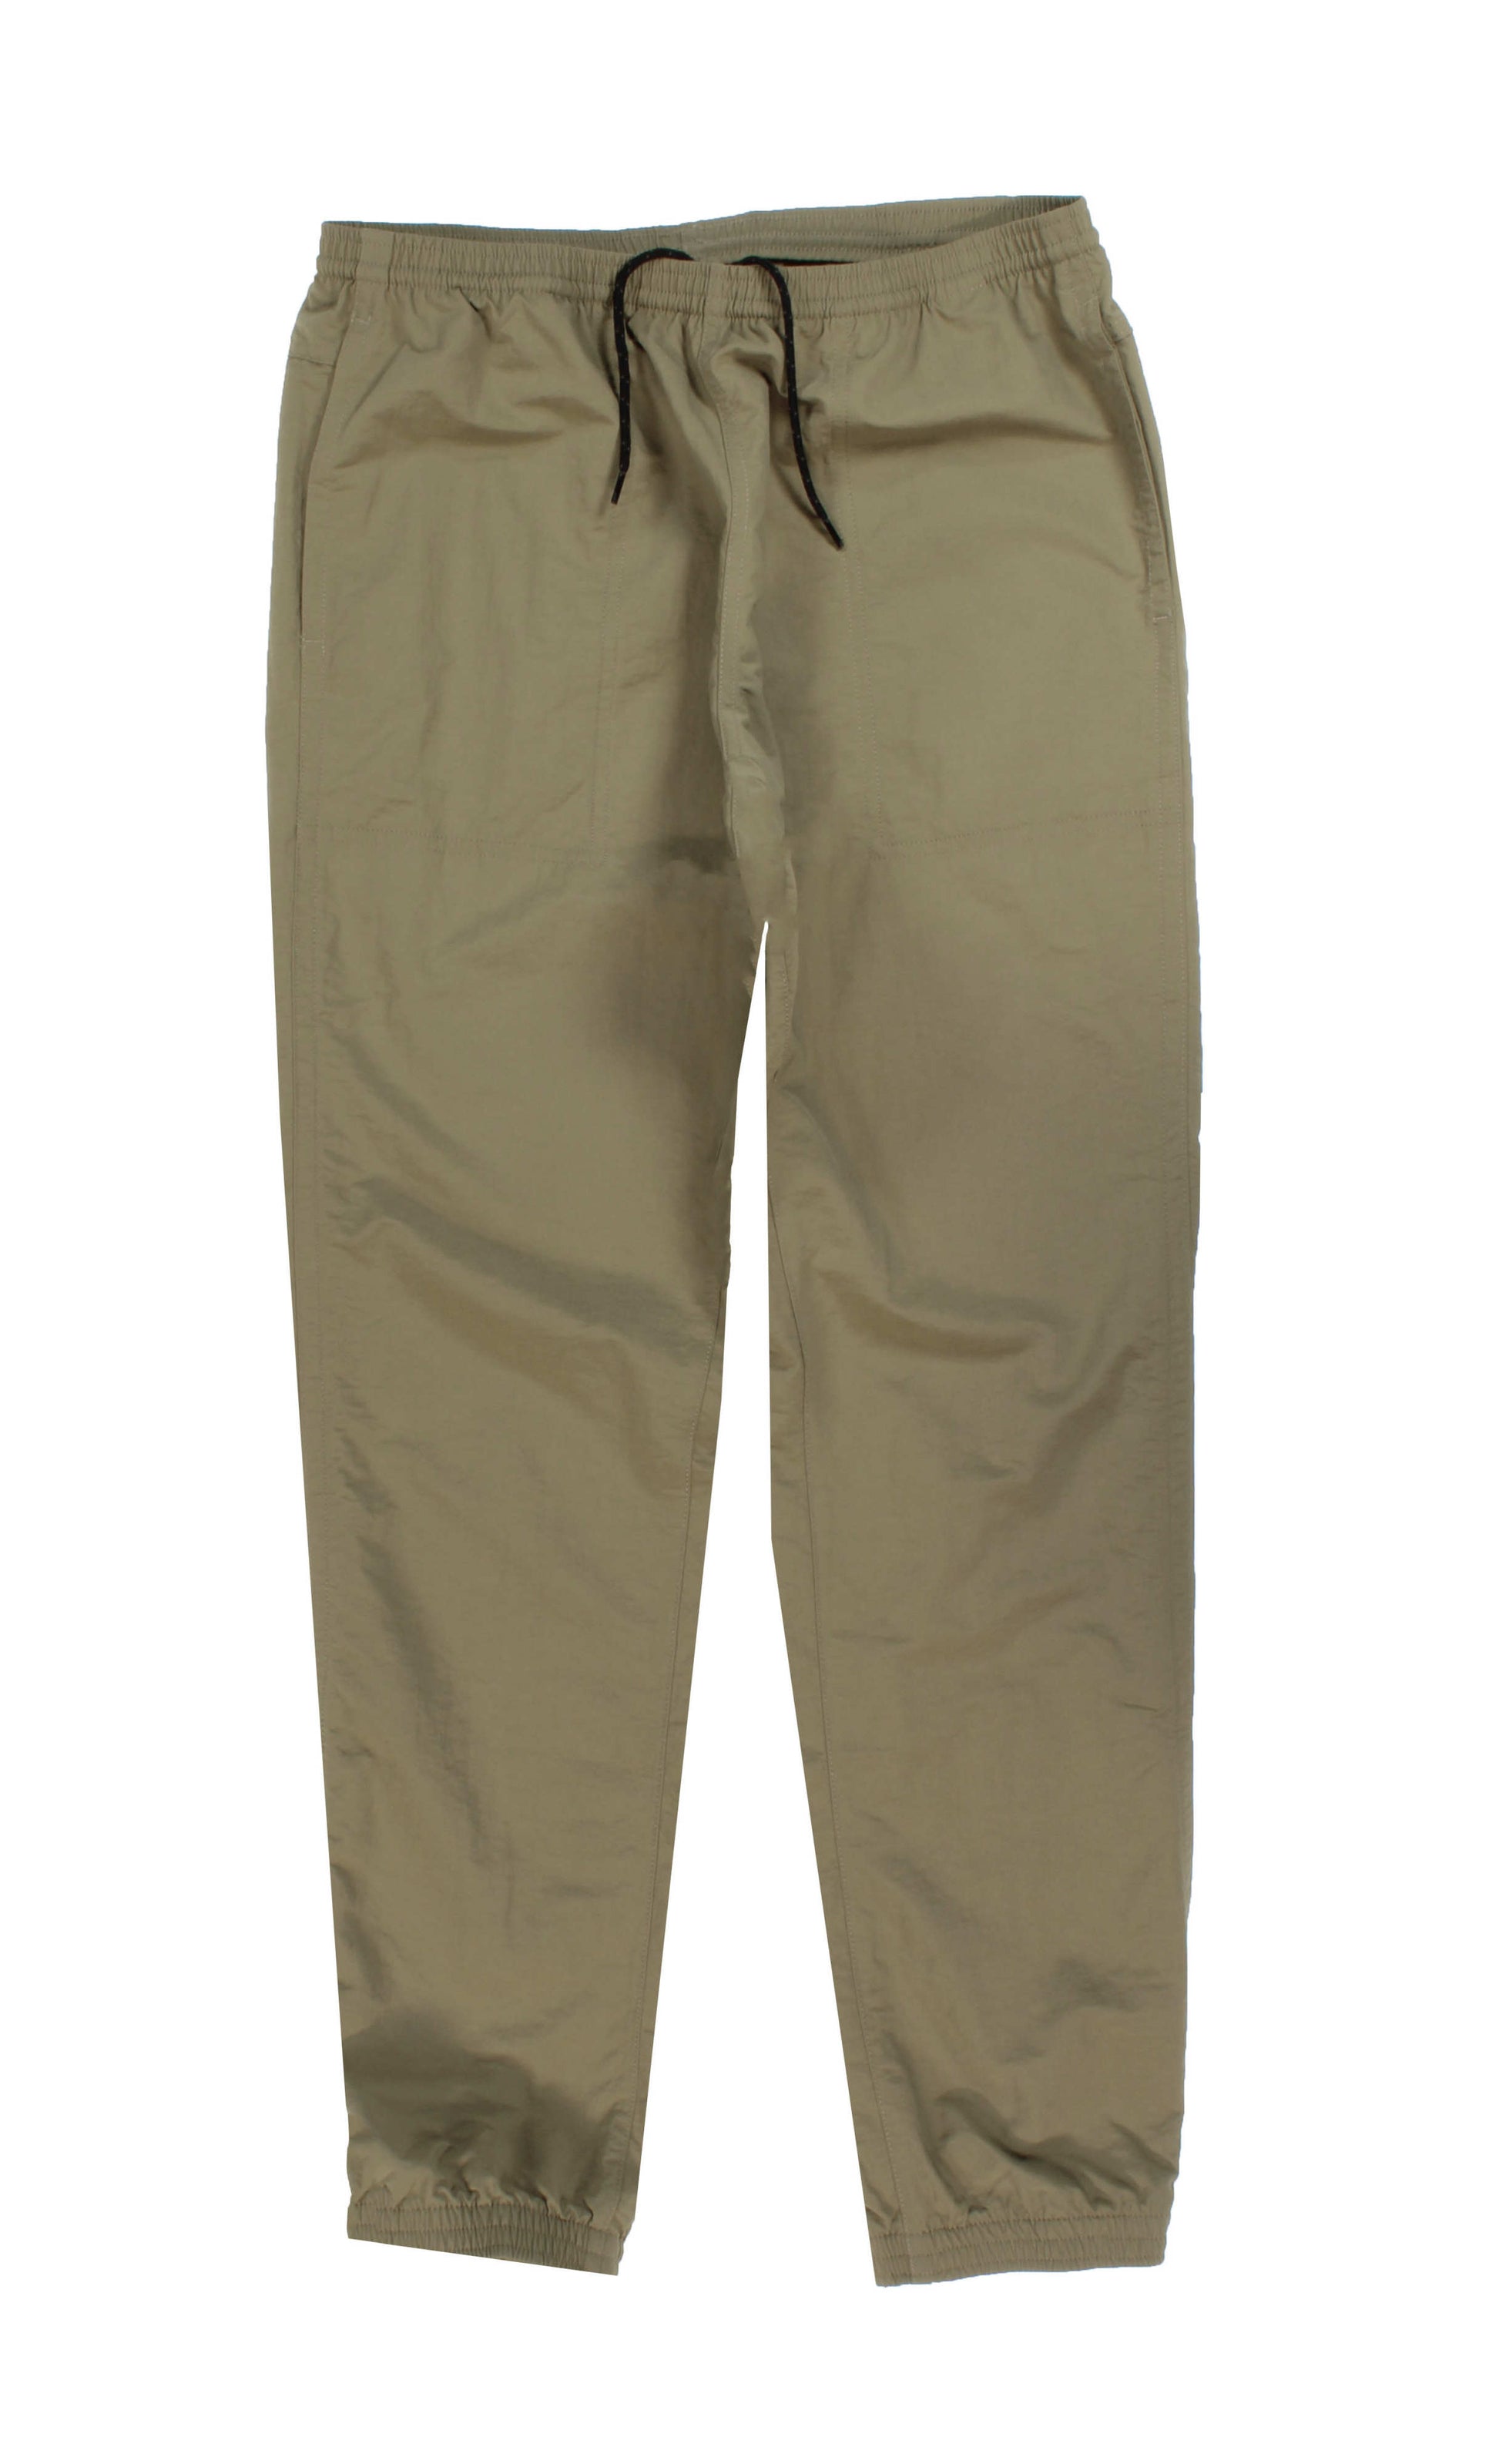 Patagonia Baggies Pants - Sprouted Green